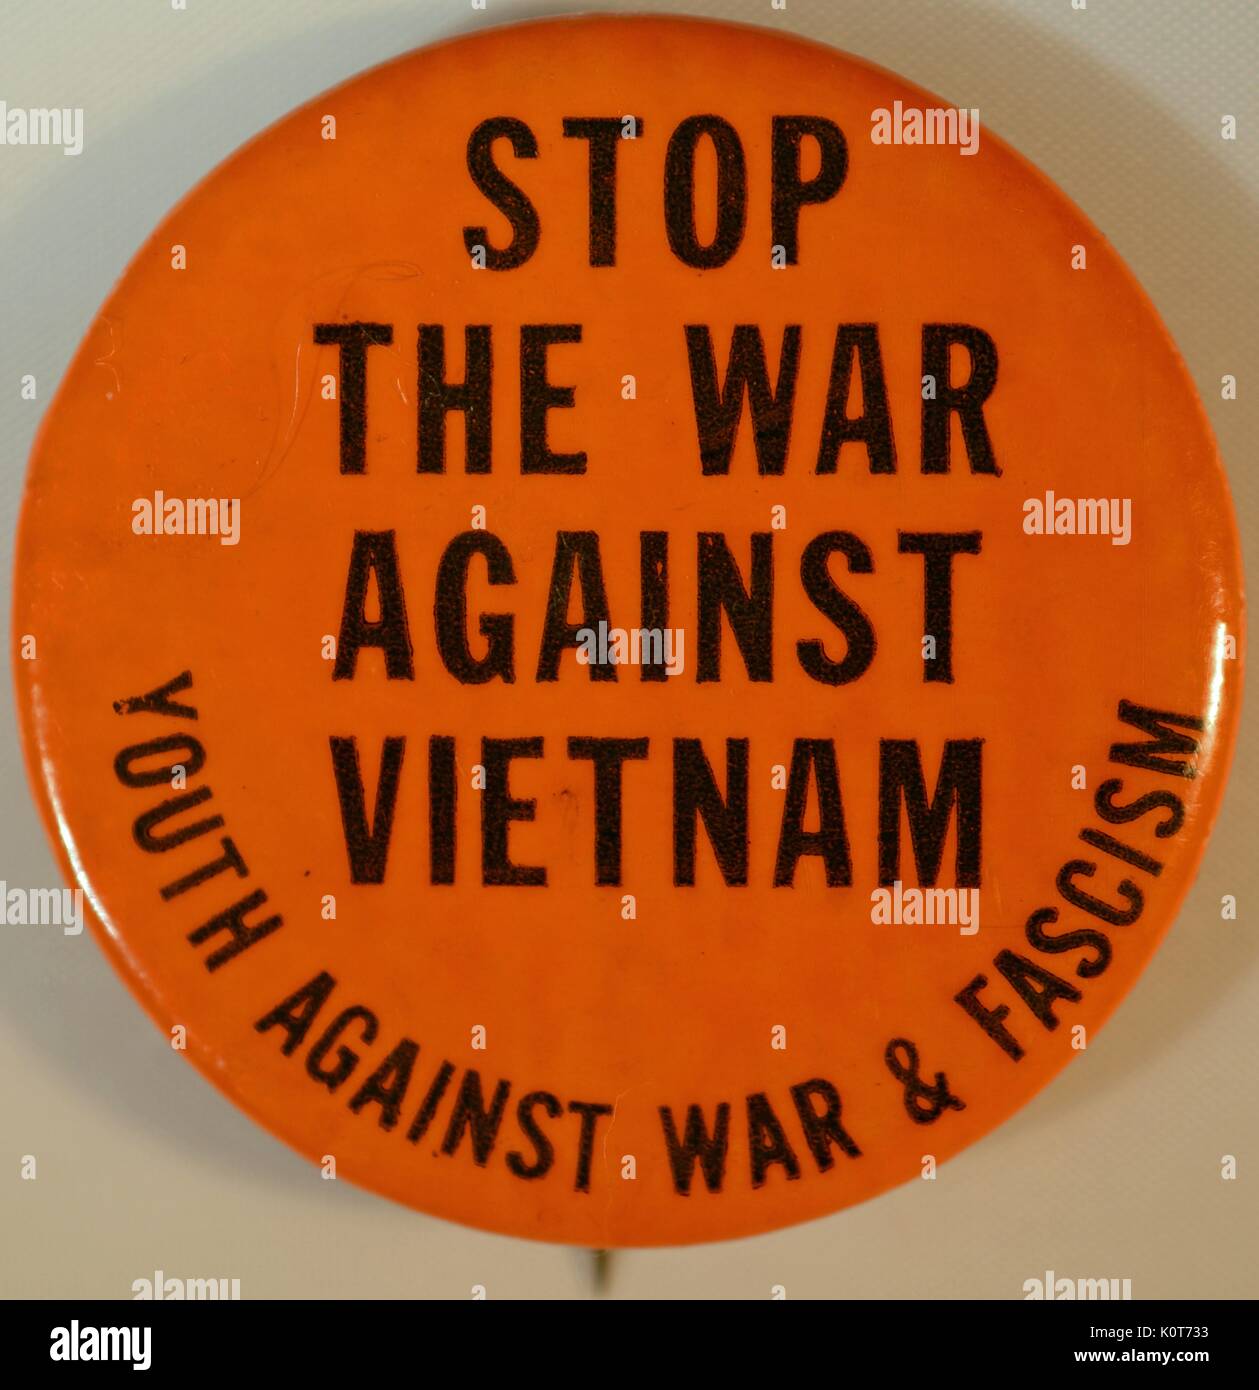 An anti-Vietnam War protest pin that has an orange background and contains the text 'Stop the war on Vietnam', the pin also includes text that reads 'Youth Against War and Fascism', 1968. Stock Photo